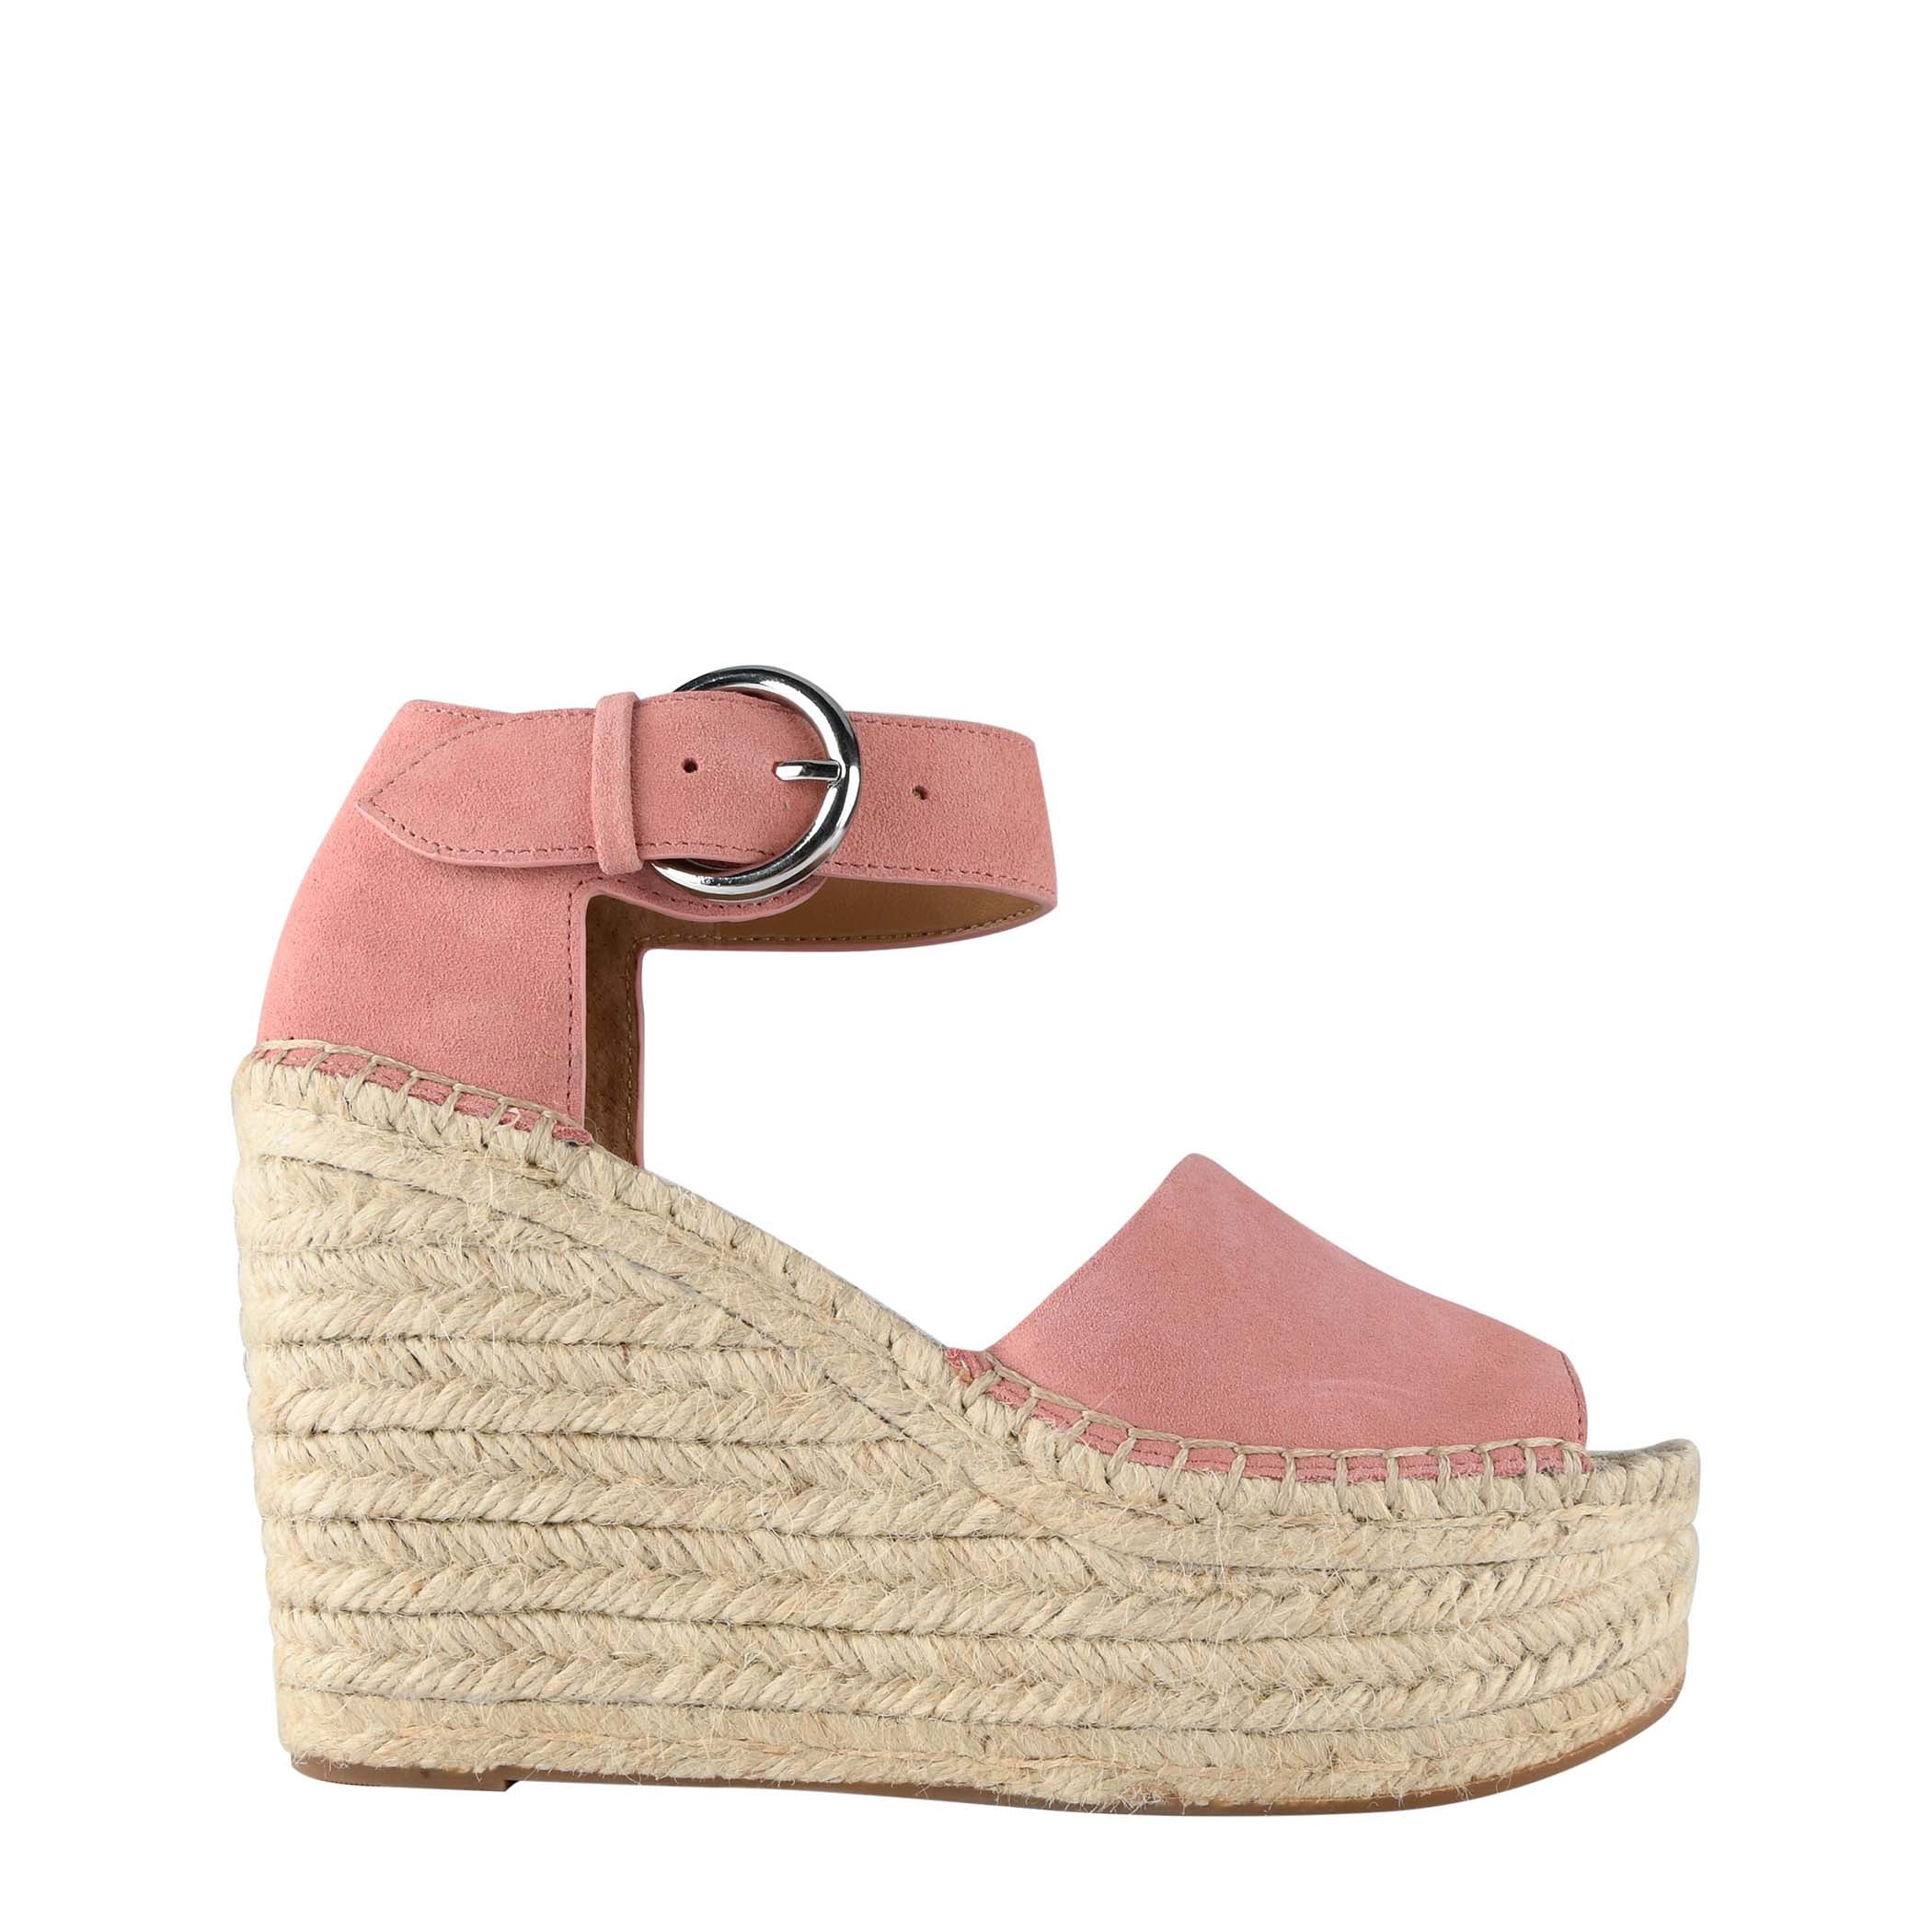 Espadrille Wedge Sandals & TFF Linkup - Doused in Pink